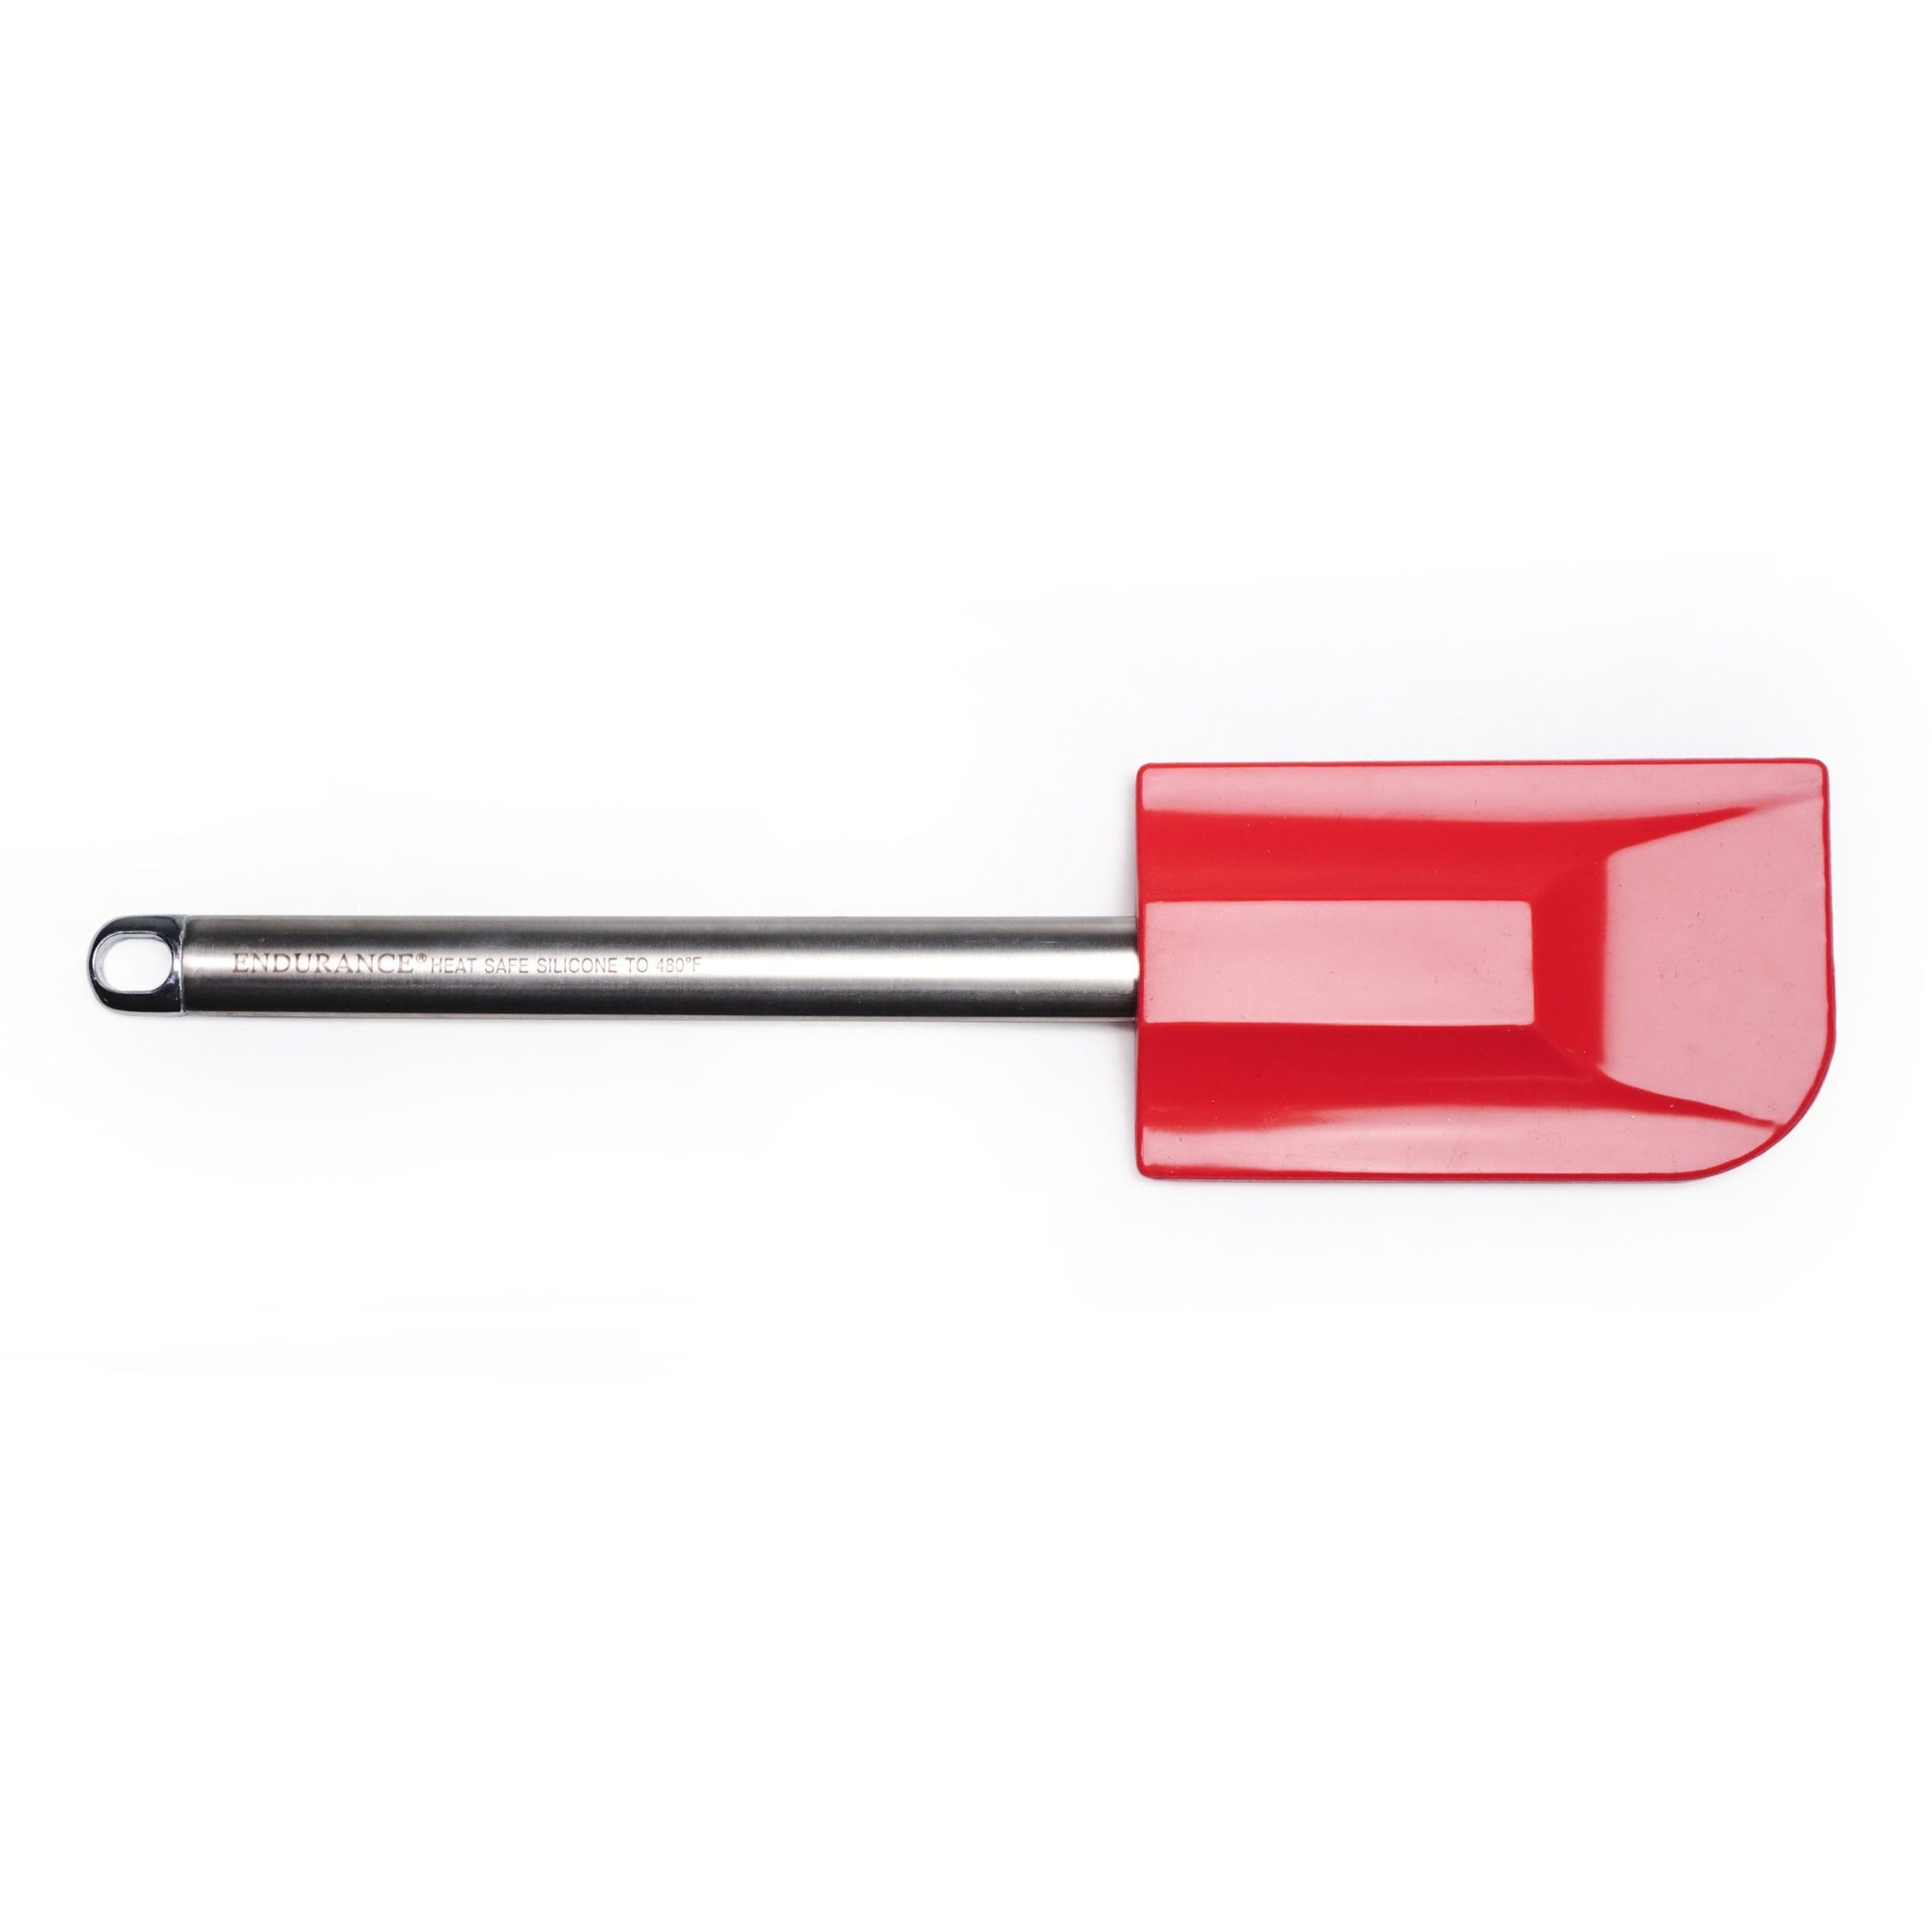 RSVP Spatula Large Red Silicone